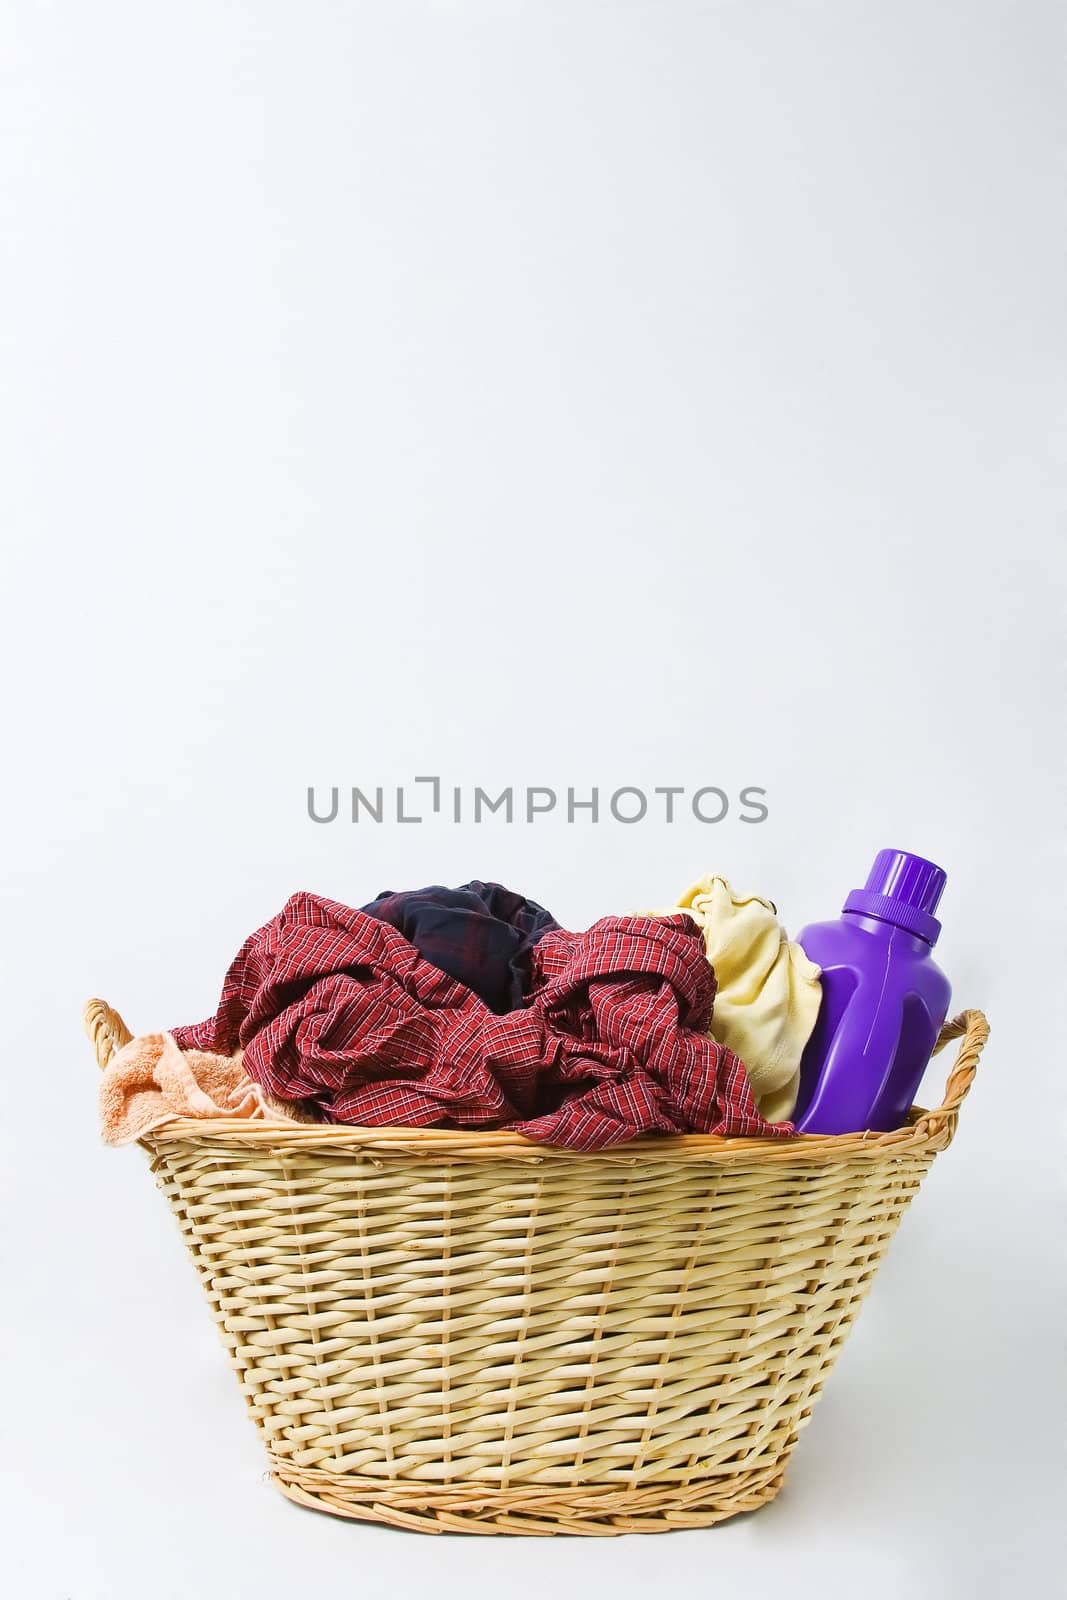 A vertical shot of a basket of dirty laundry and detergent.